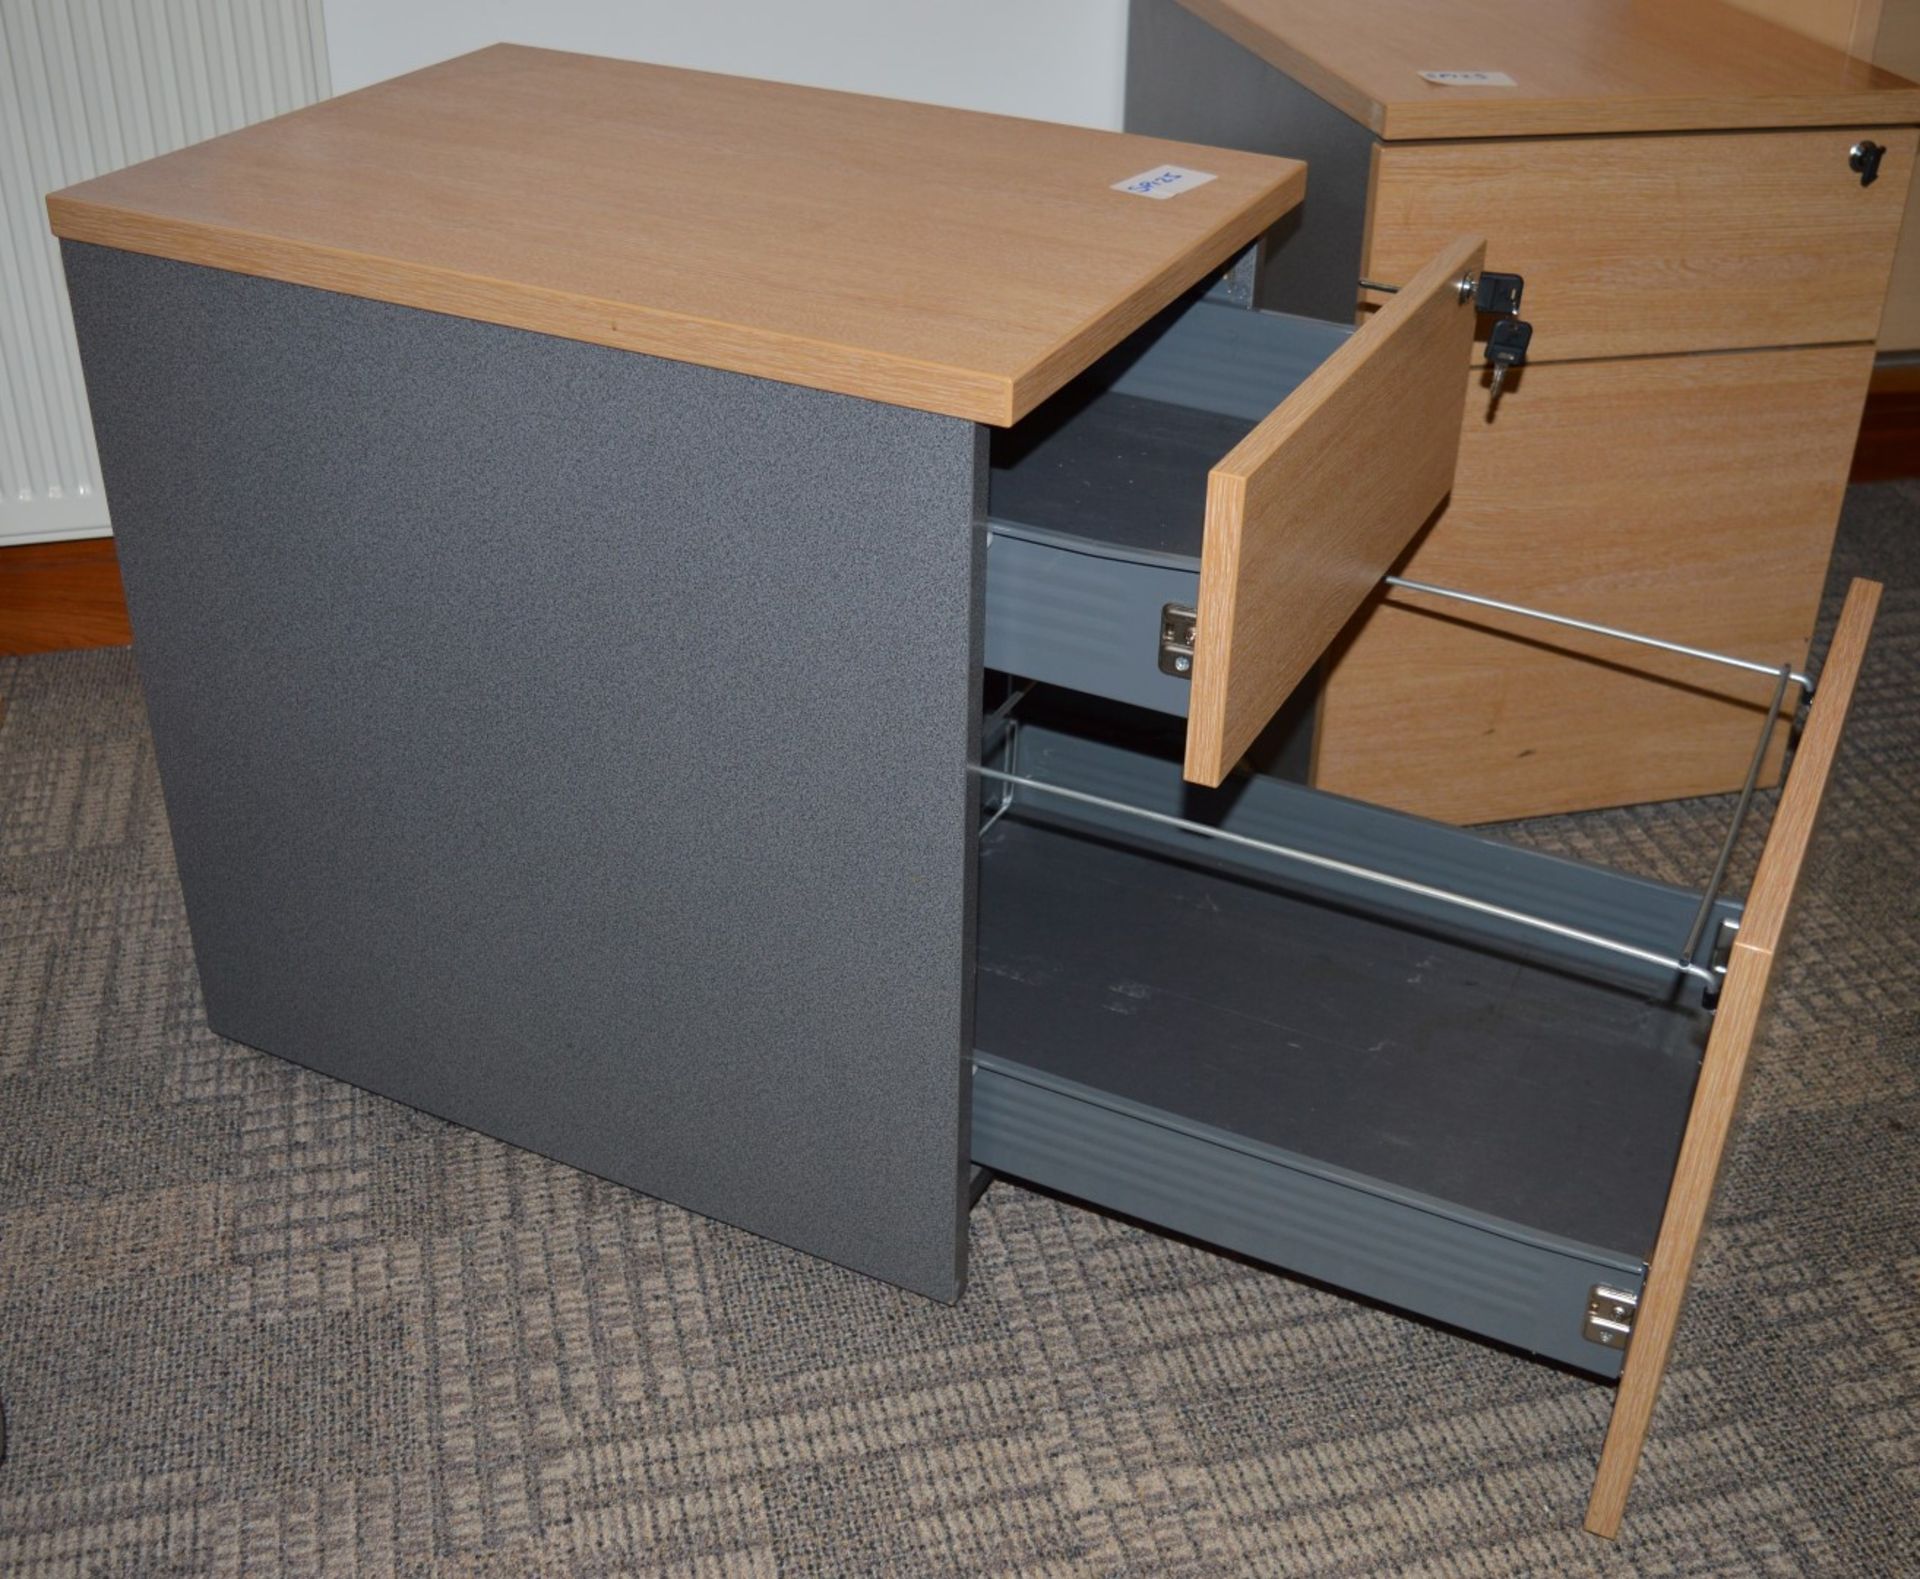 1 x Two Drawer Mobile Pedestal Drawers - Includes Key - Modern Beech / Grey Finish - Storage - Image 2 of 2